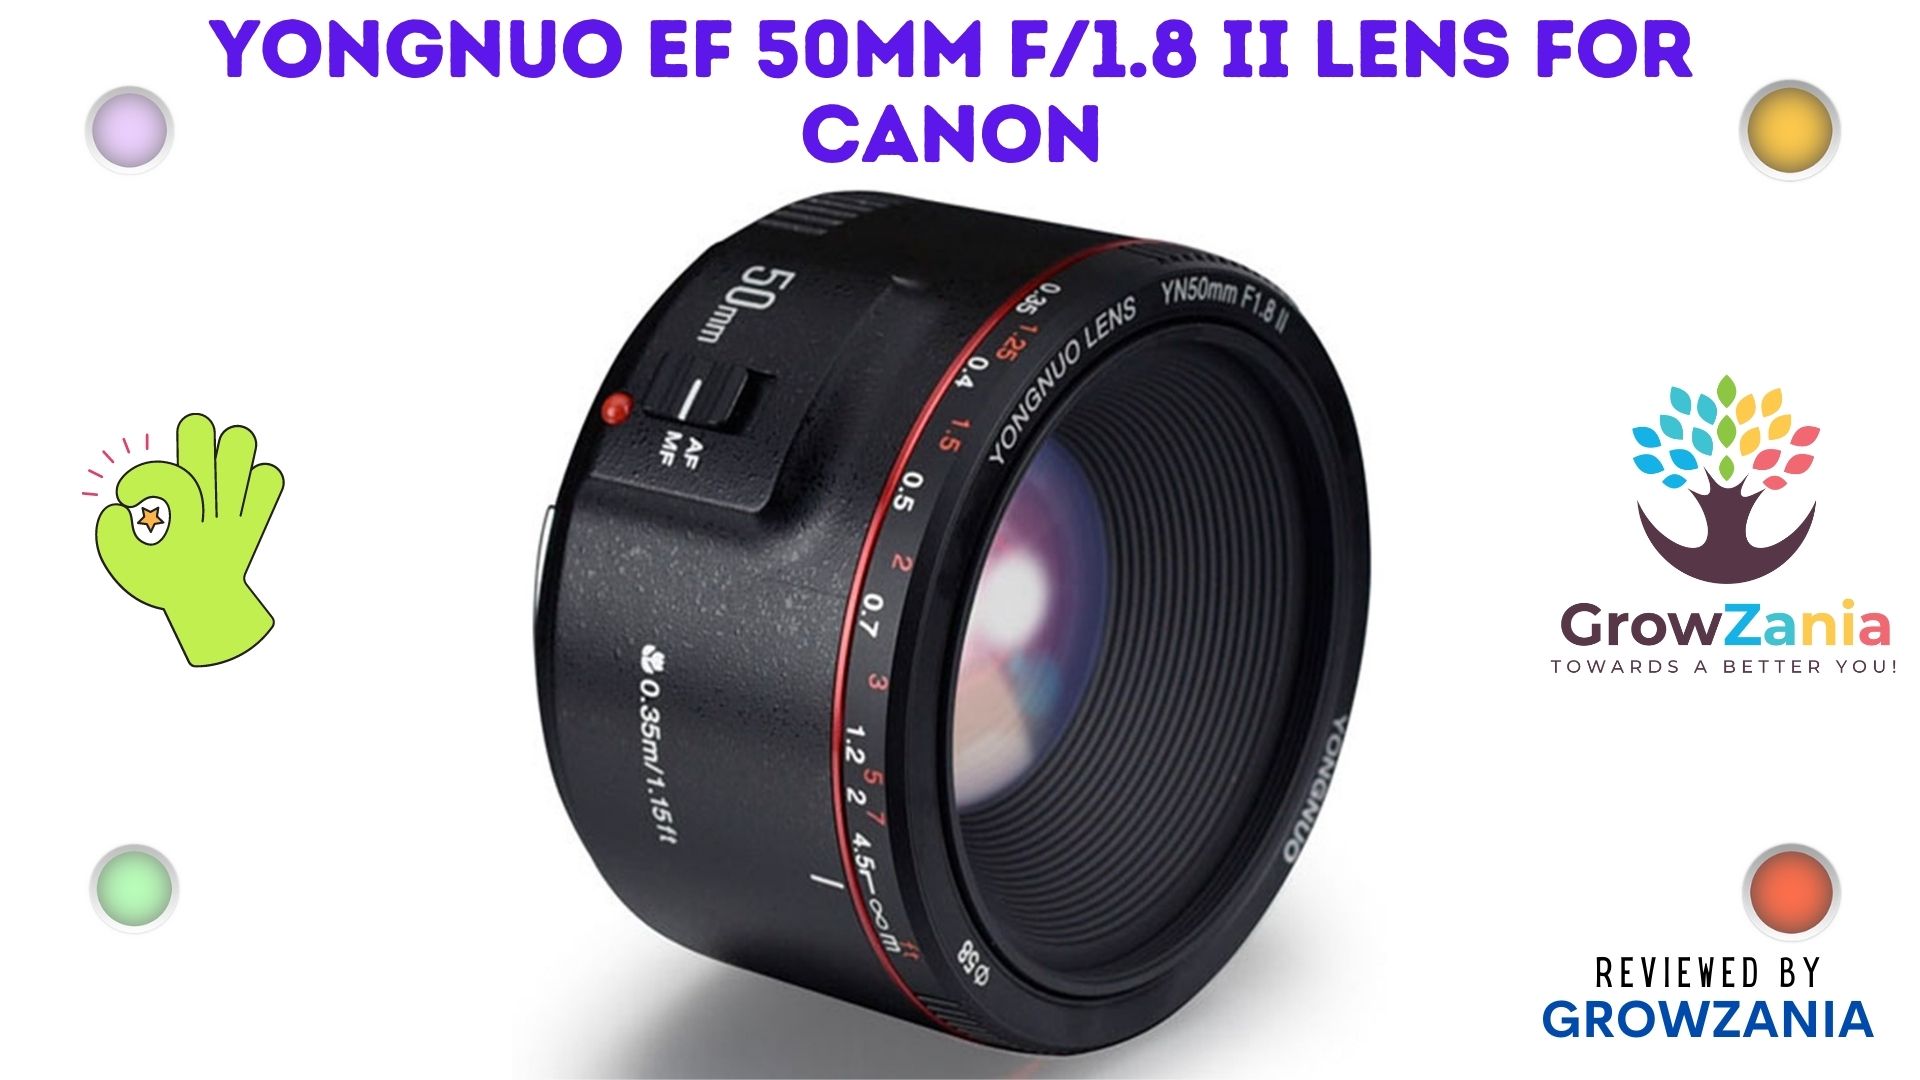 Yongnuo EF 50mm f/1.8 II Lens For Canon